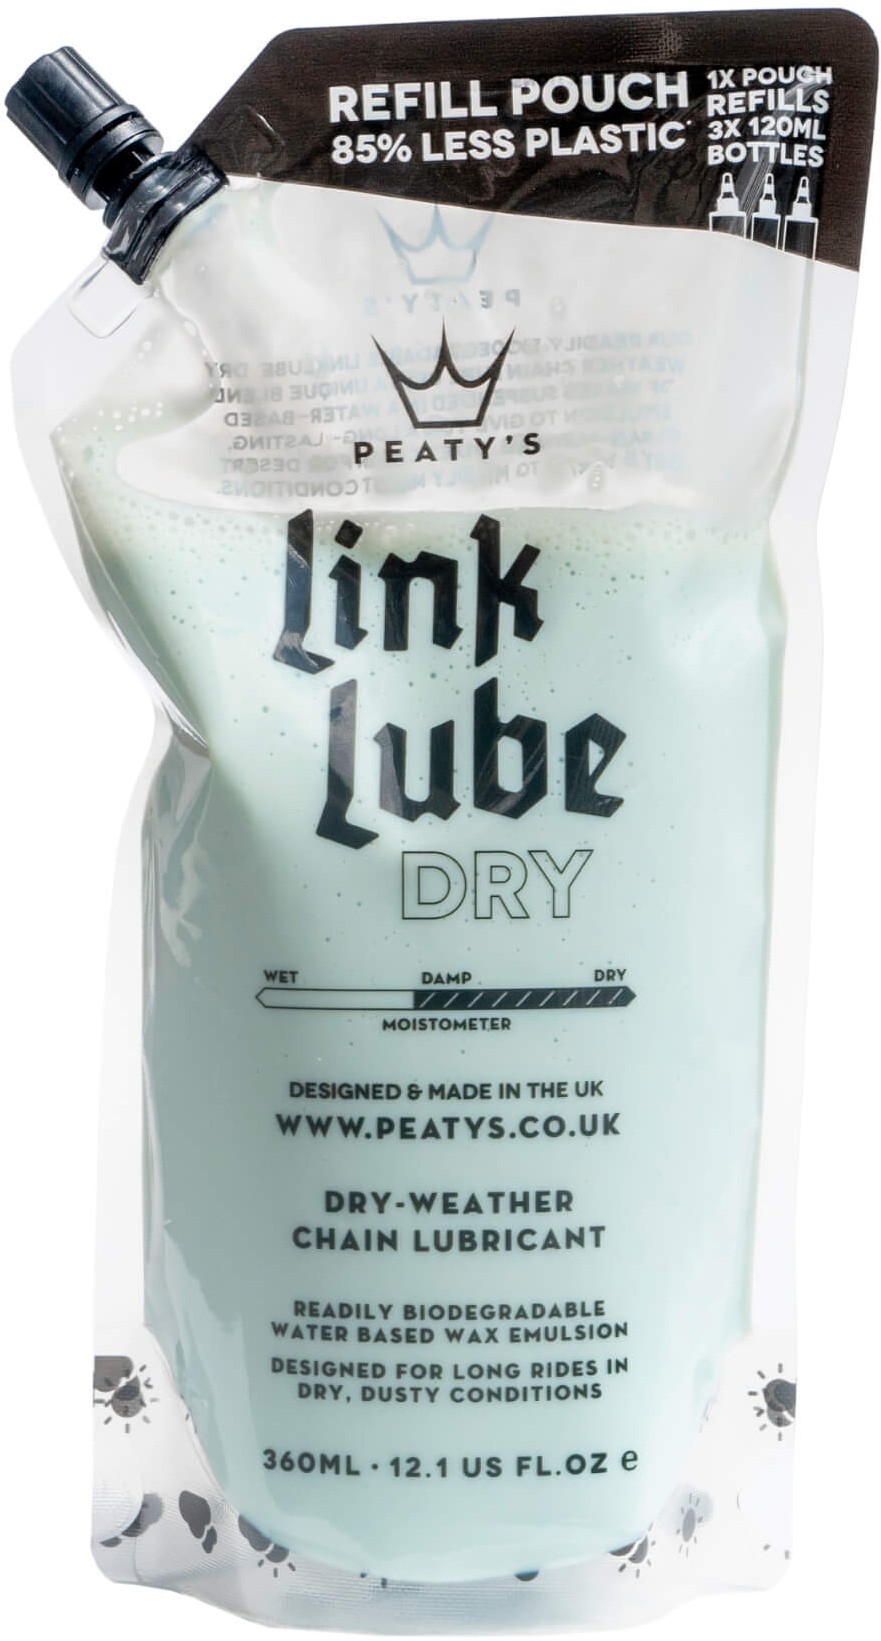 LinkLube Dry Refill Pouch 360ml image 0